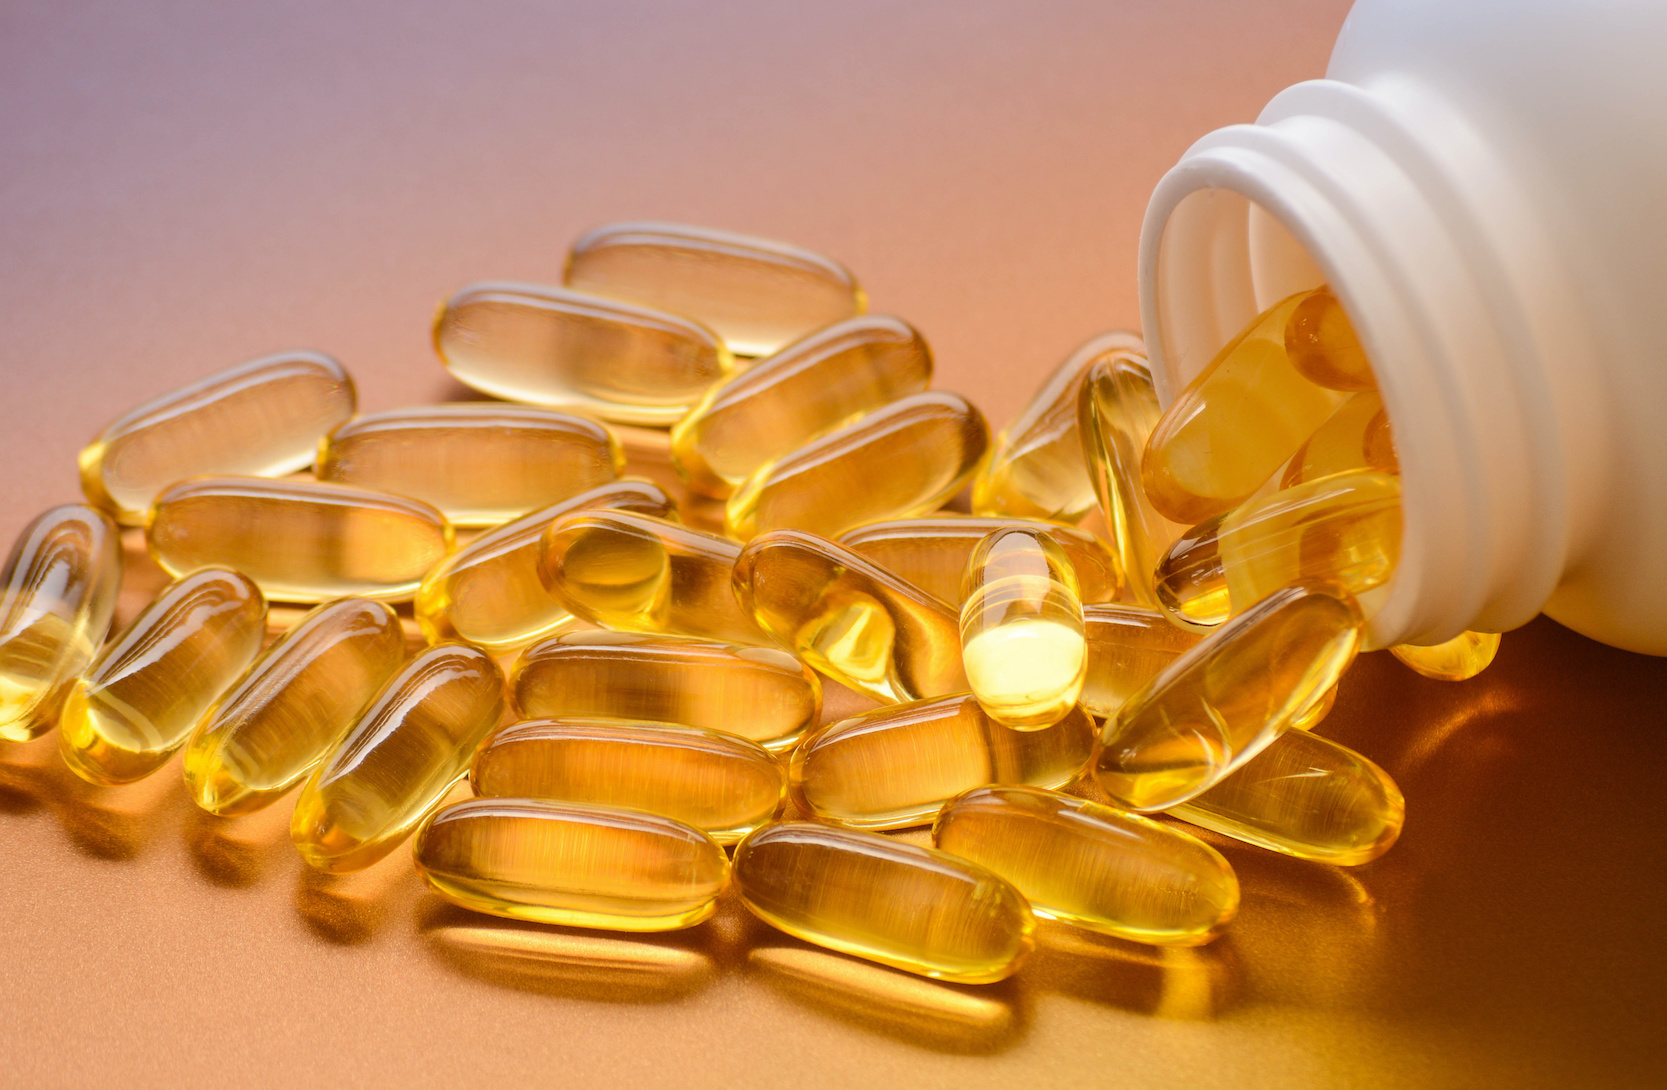 Fish oil capsules with omega 3 and vitamin D in a plastic bottle on a shiny texture, healthy diet concept